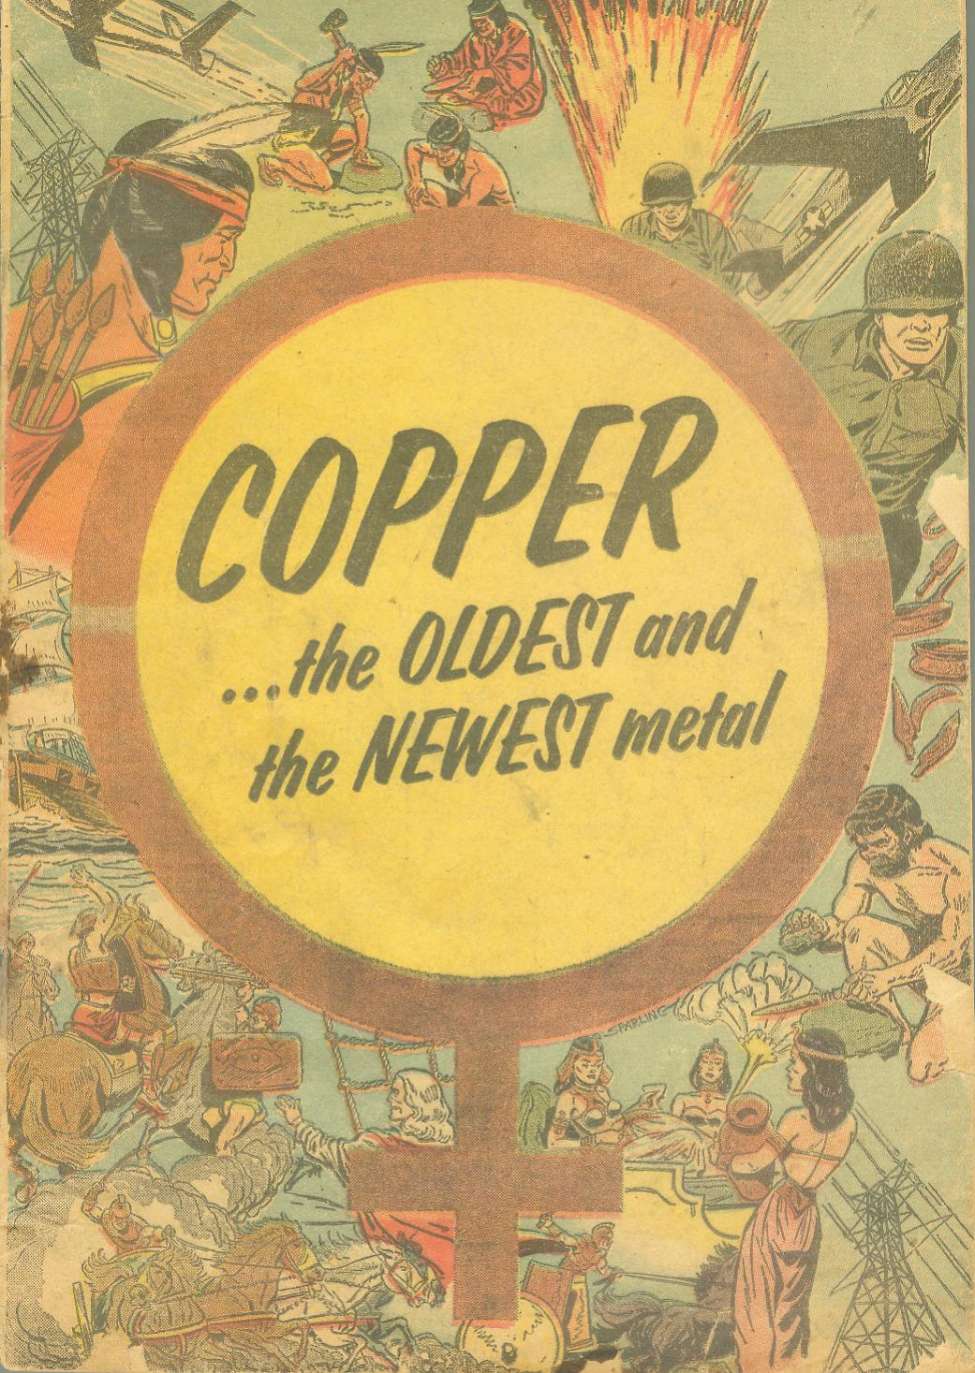 Comic Book Cover For Copper...the Oldest and the Newest Metal